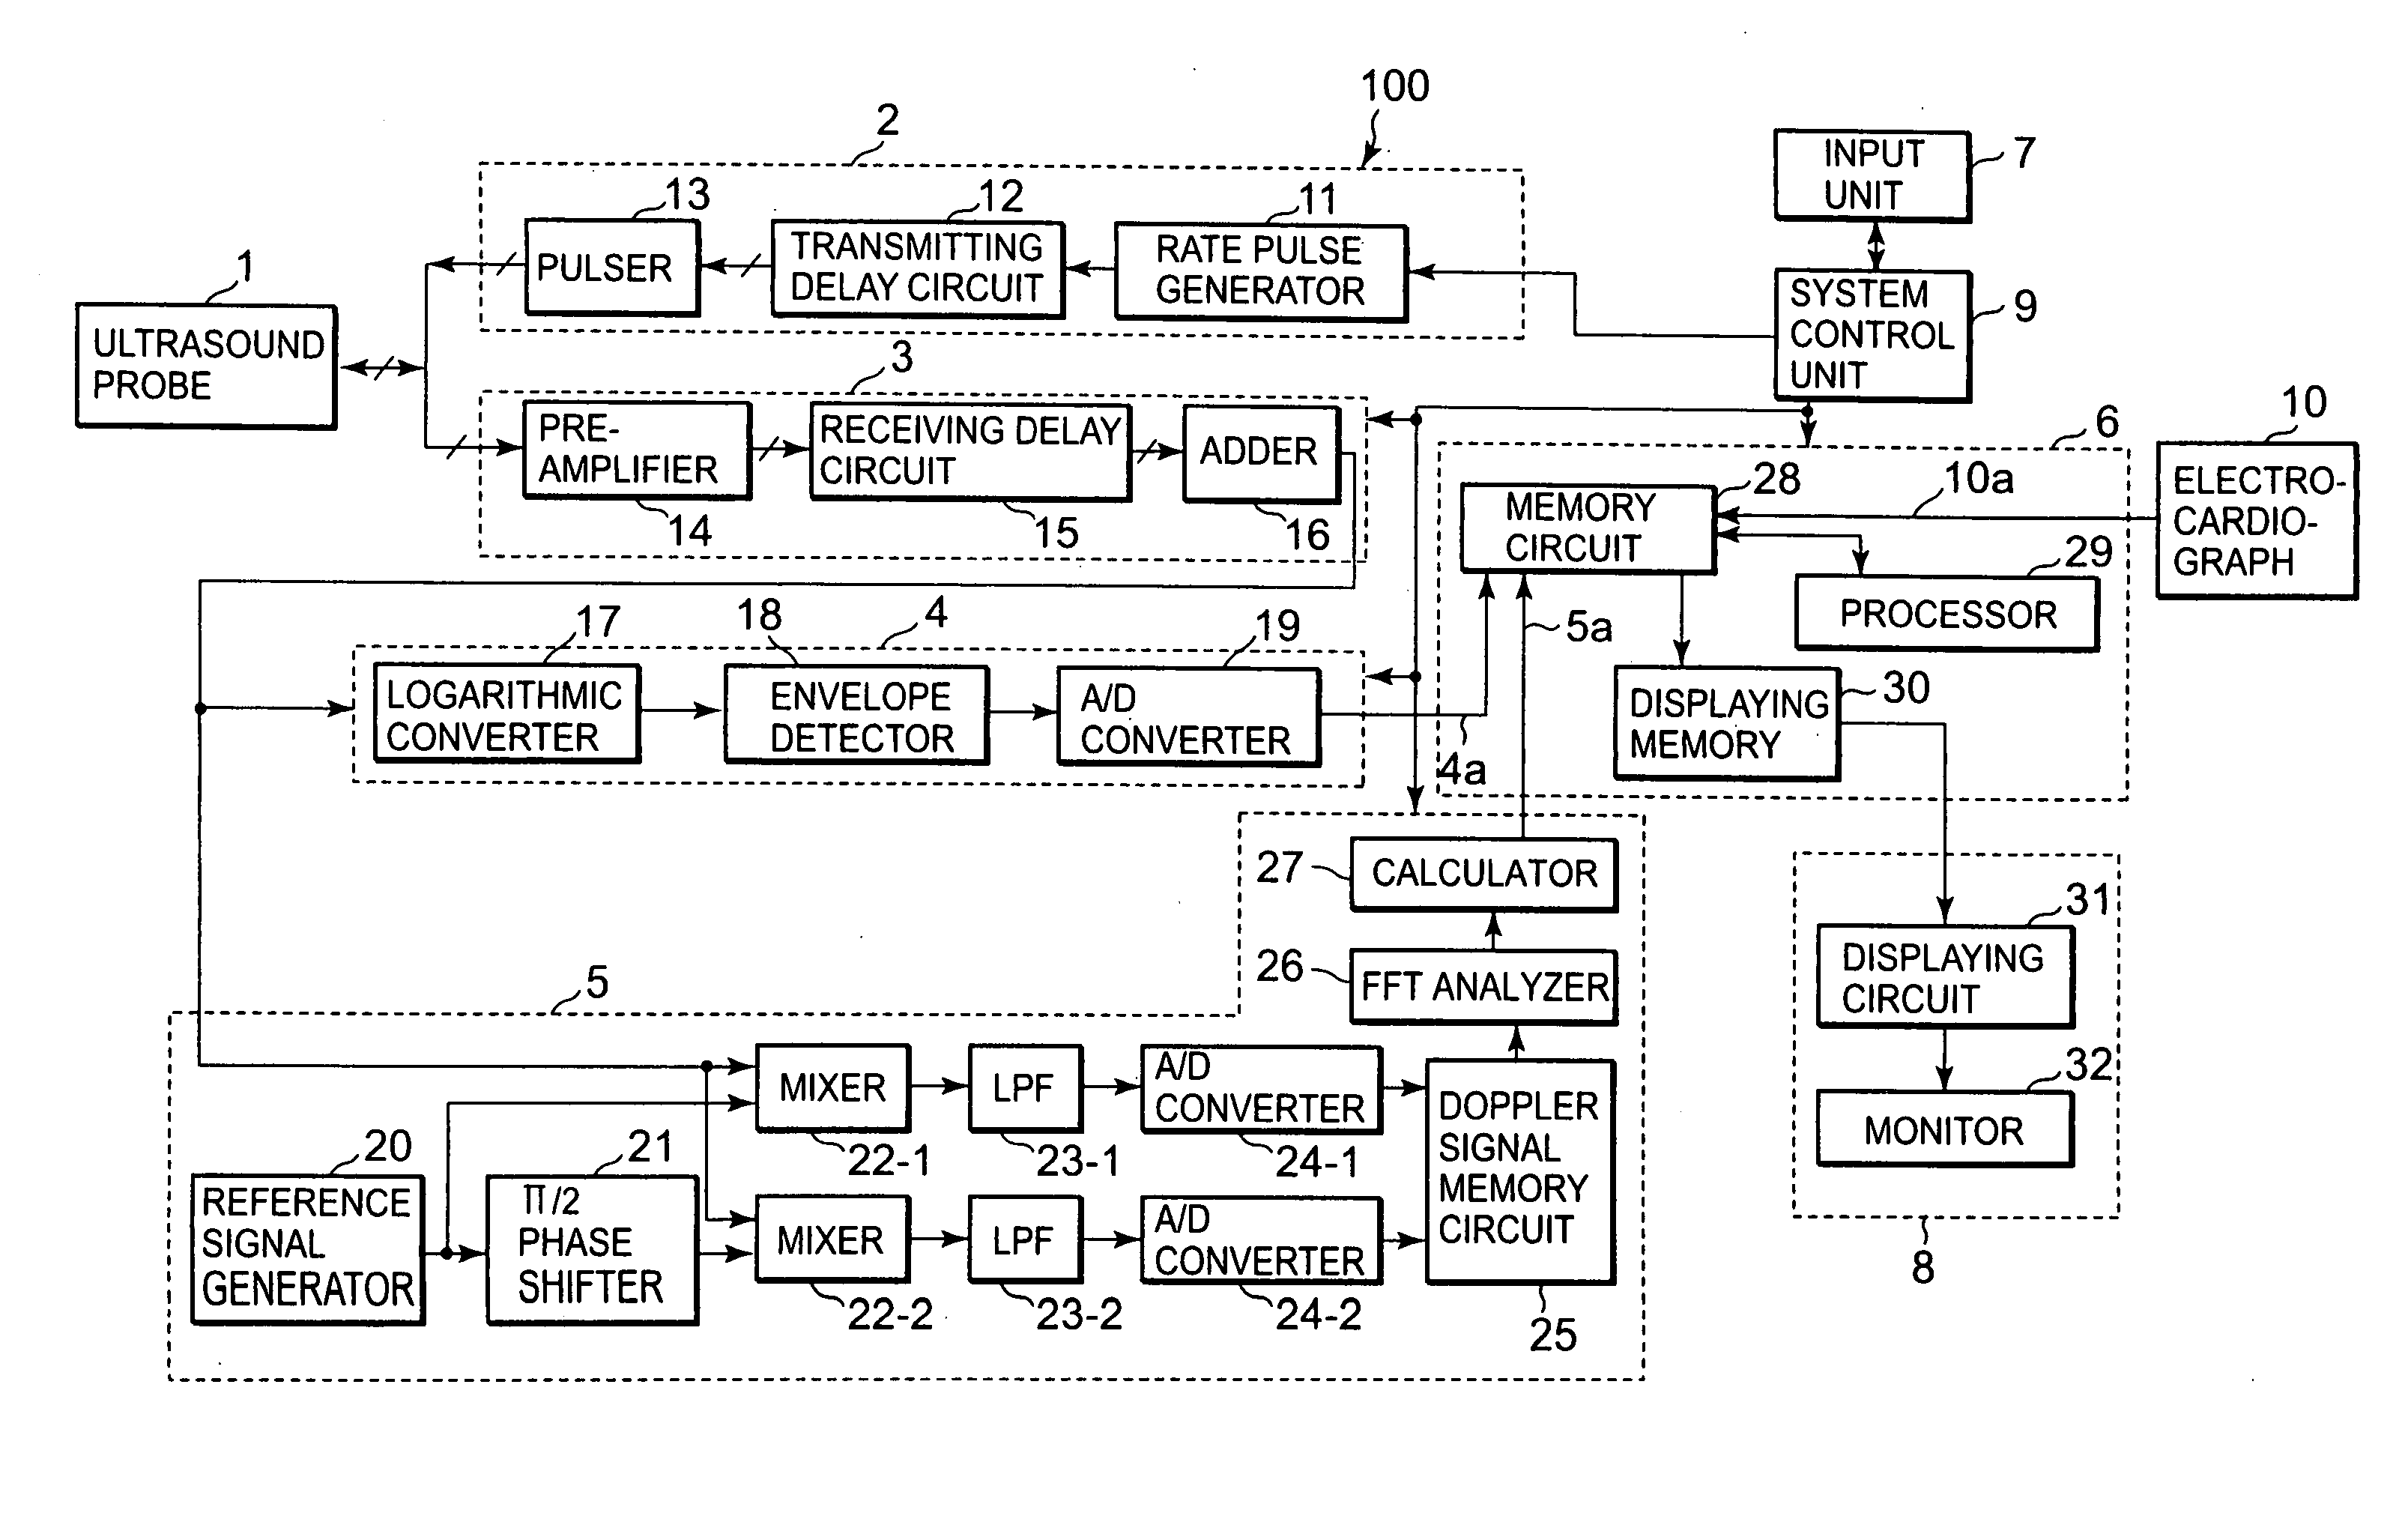 Ultrasound image diagnosis apparatus and an apparatus and method for processing an image display